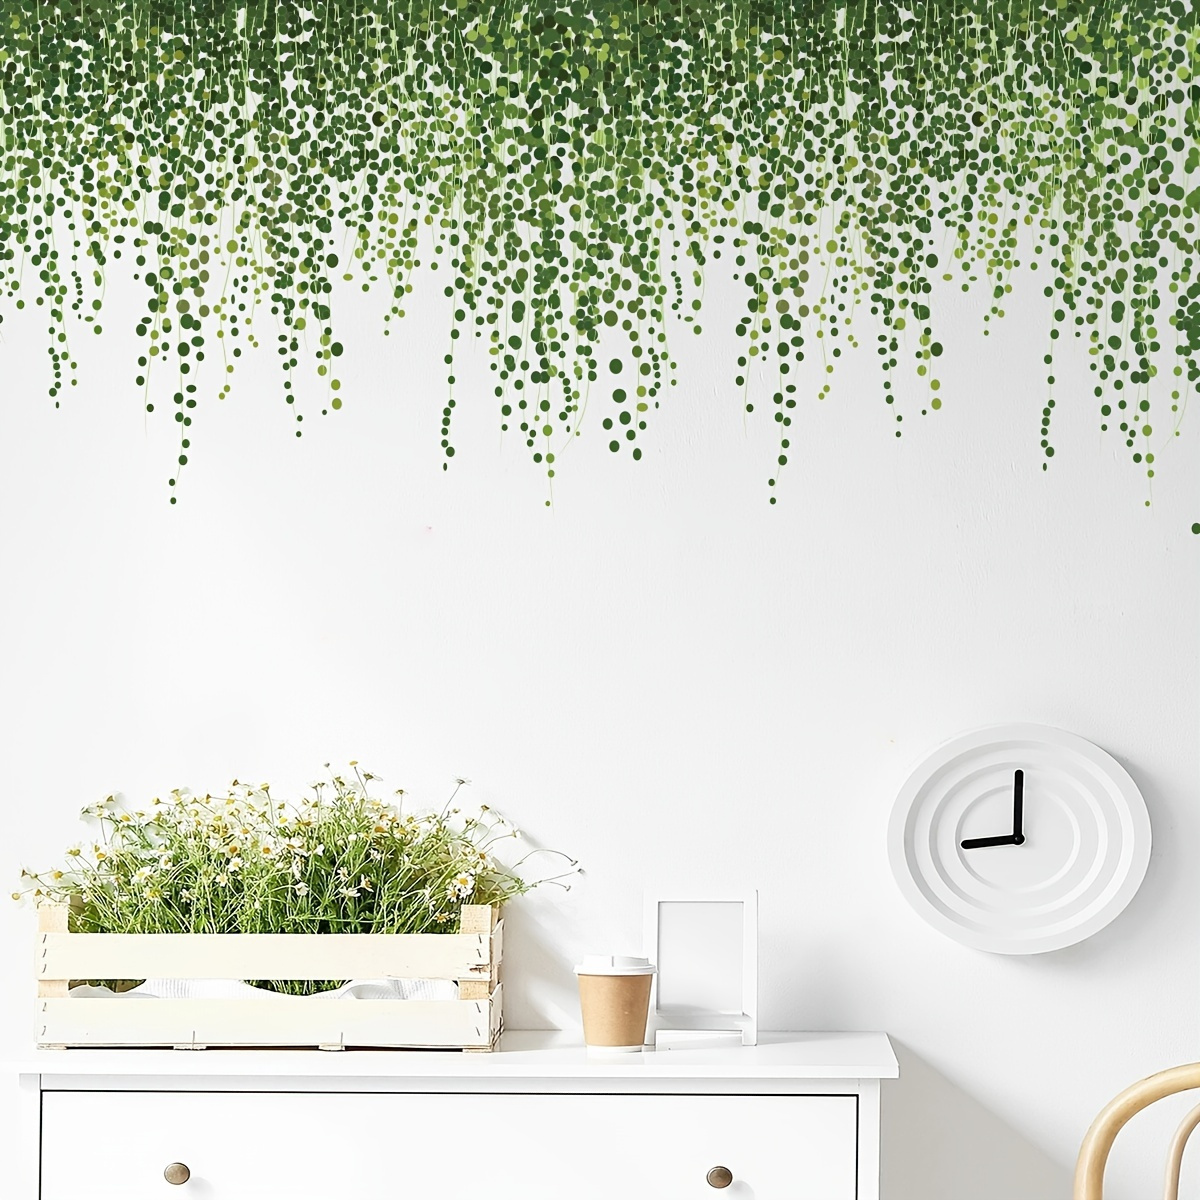 

Transform Your Wall With This 1pc Long Green Vine Decorative Sticker - Diy Materials Included!